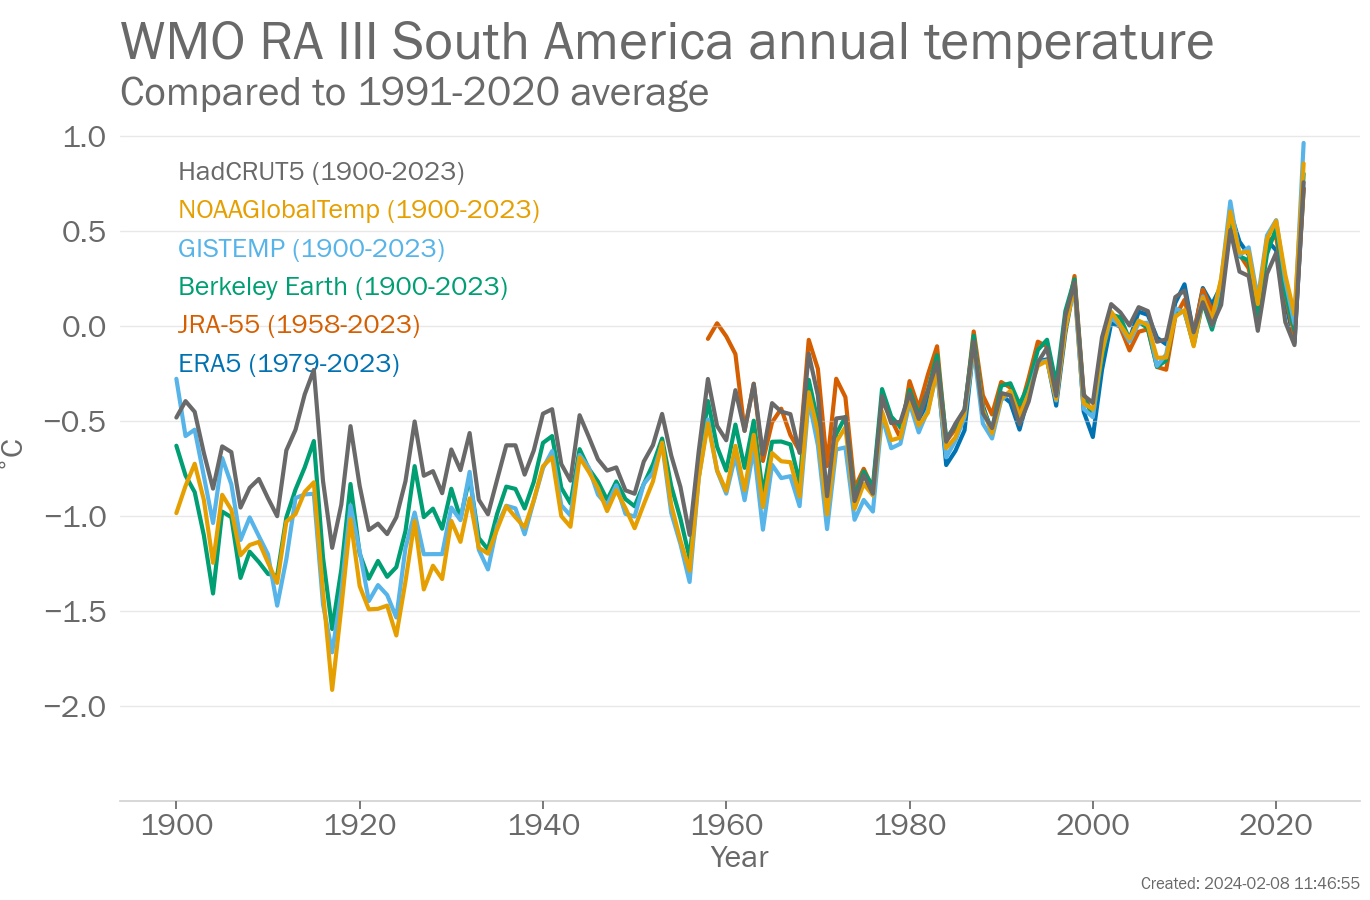 Annual Regional mean temperature for WMO RA 3 South America (°C, difference from the 1991-2020 average)  from 1900-2023. Data are from the following six data sets: Berkeley Earth, ERA5, GISTEMP, HadCRUT5, JRA-55, NOAAGlobalTemp.